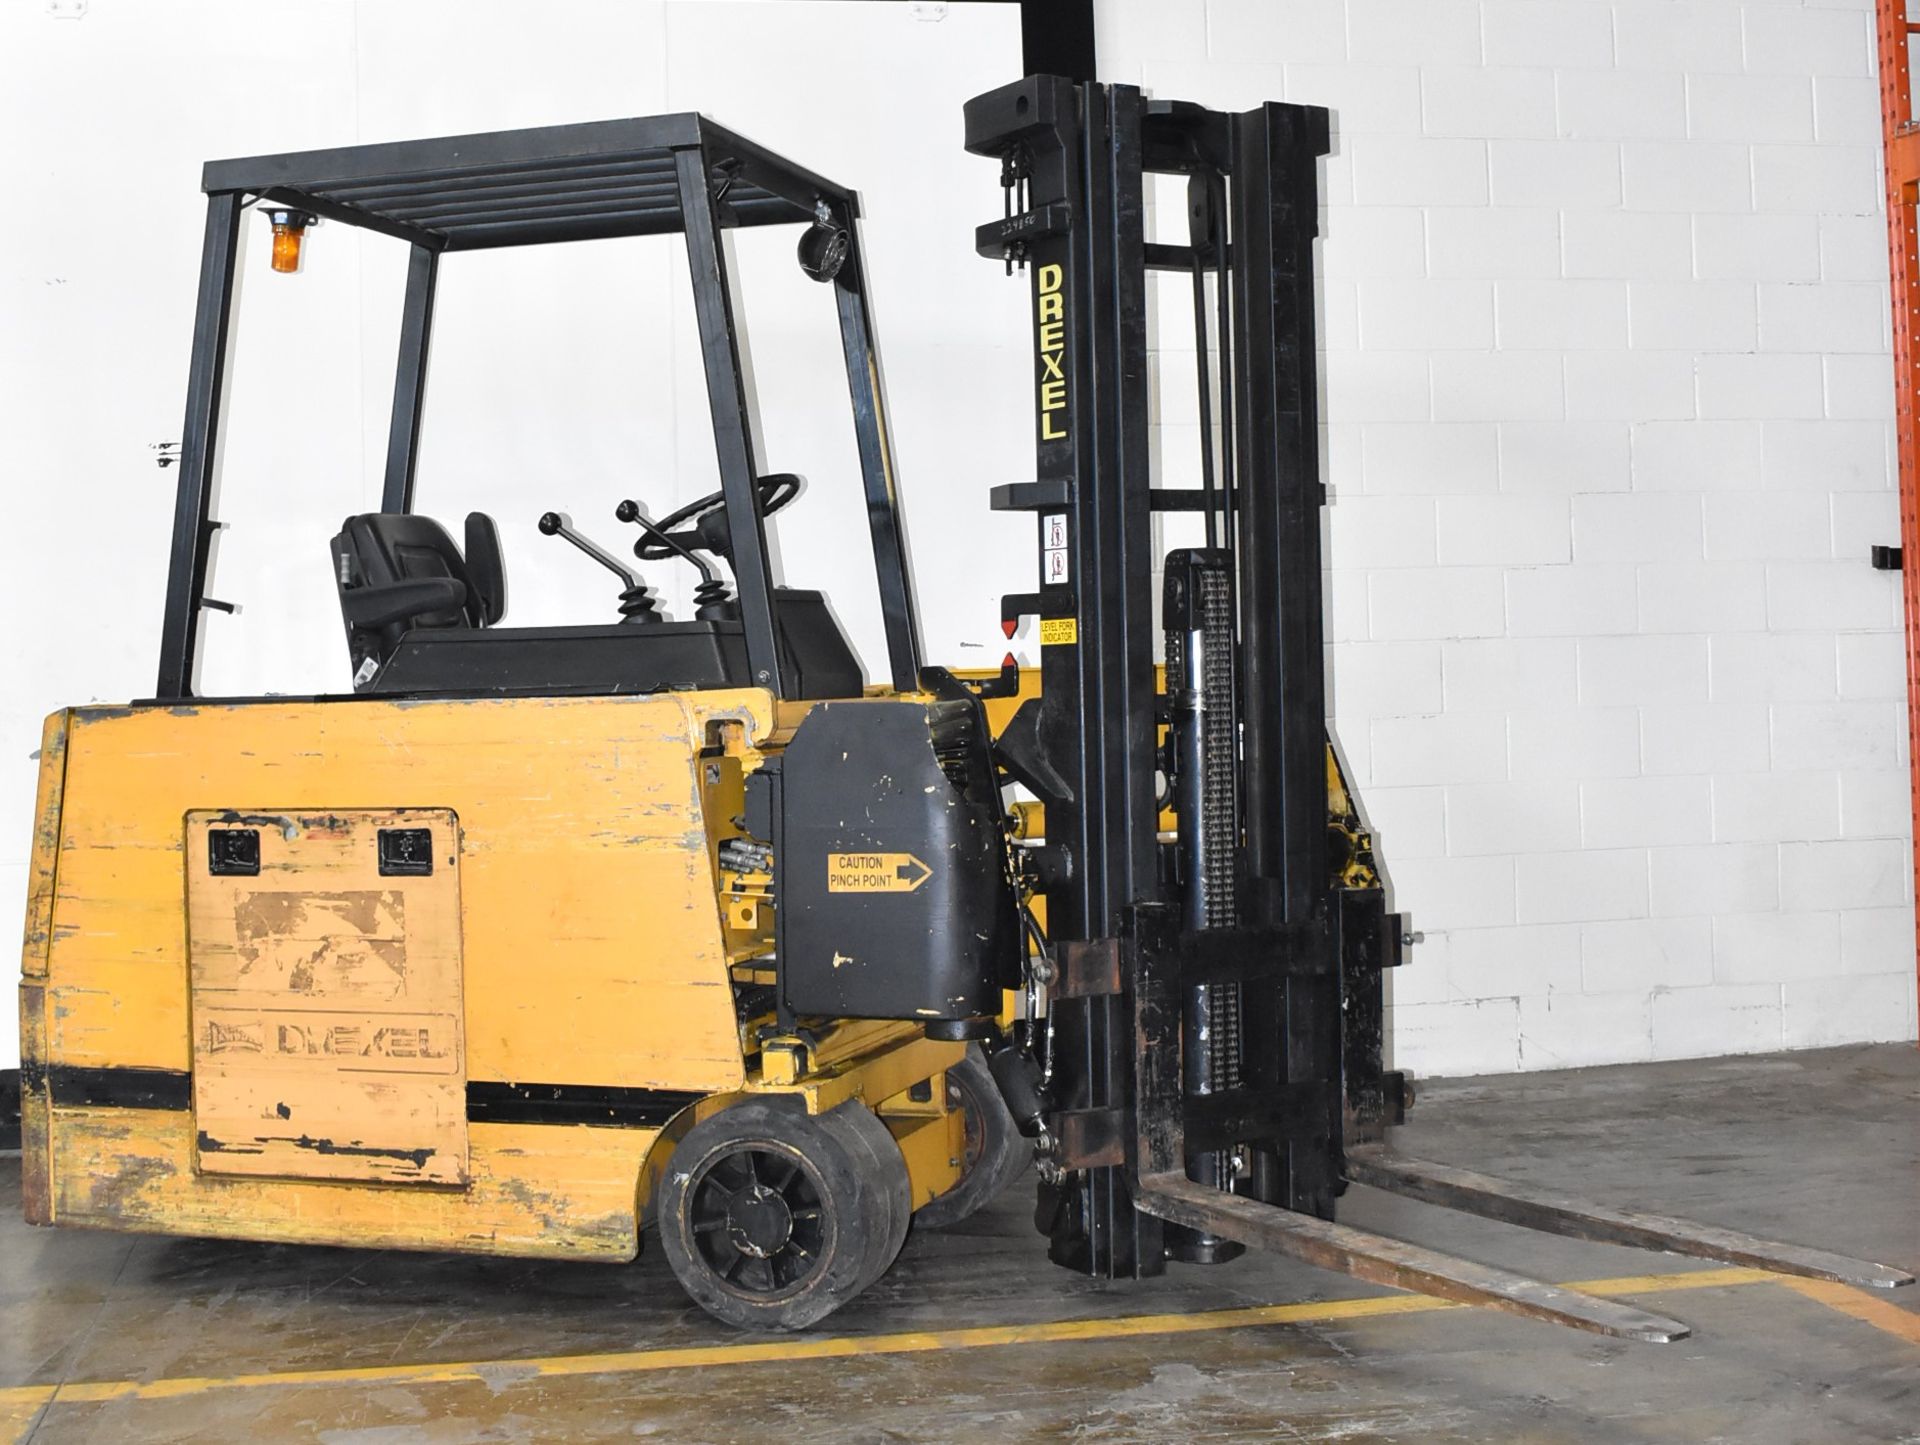 DREXEL SLT30 36V ELECTRIC NARROW AISLE COUNTERBALANCE FORKLIFT WITH 3,000 LB CAPACITY, 3-STAGE SWING